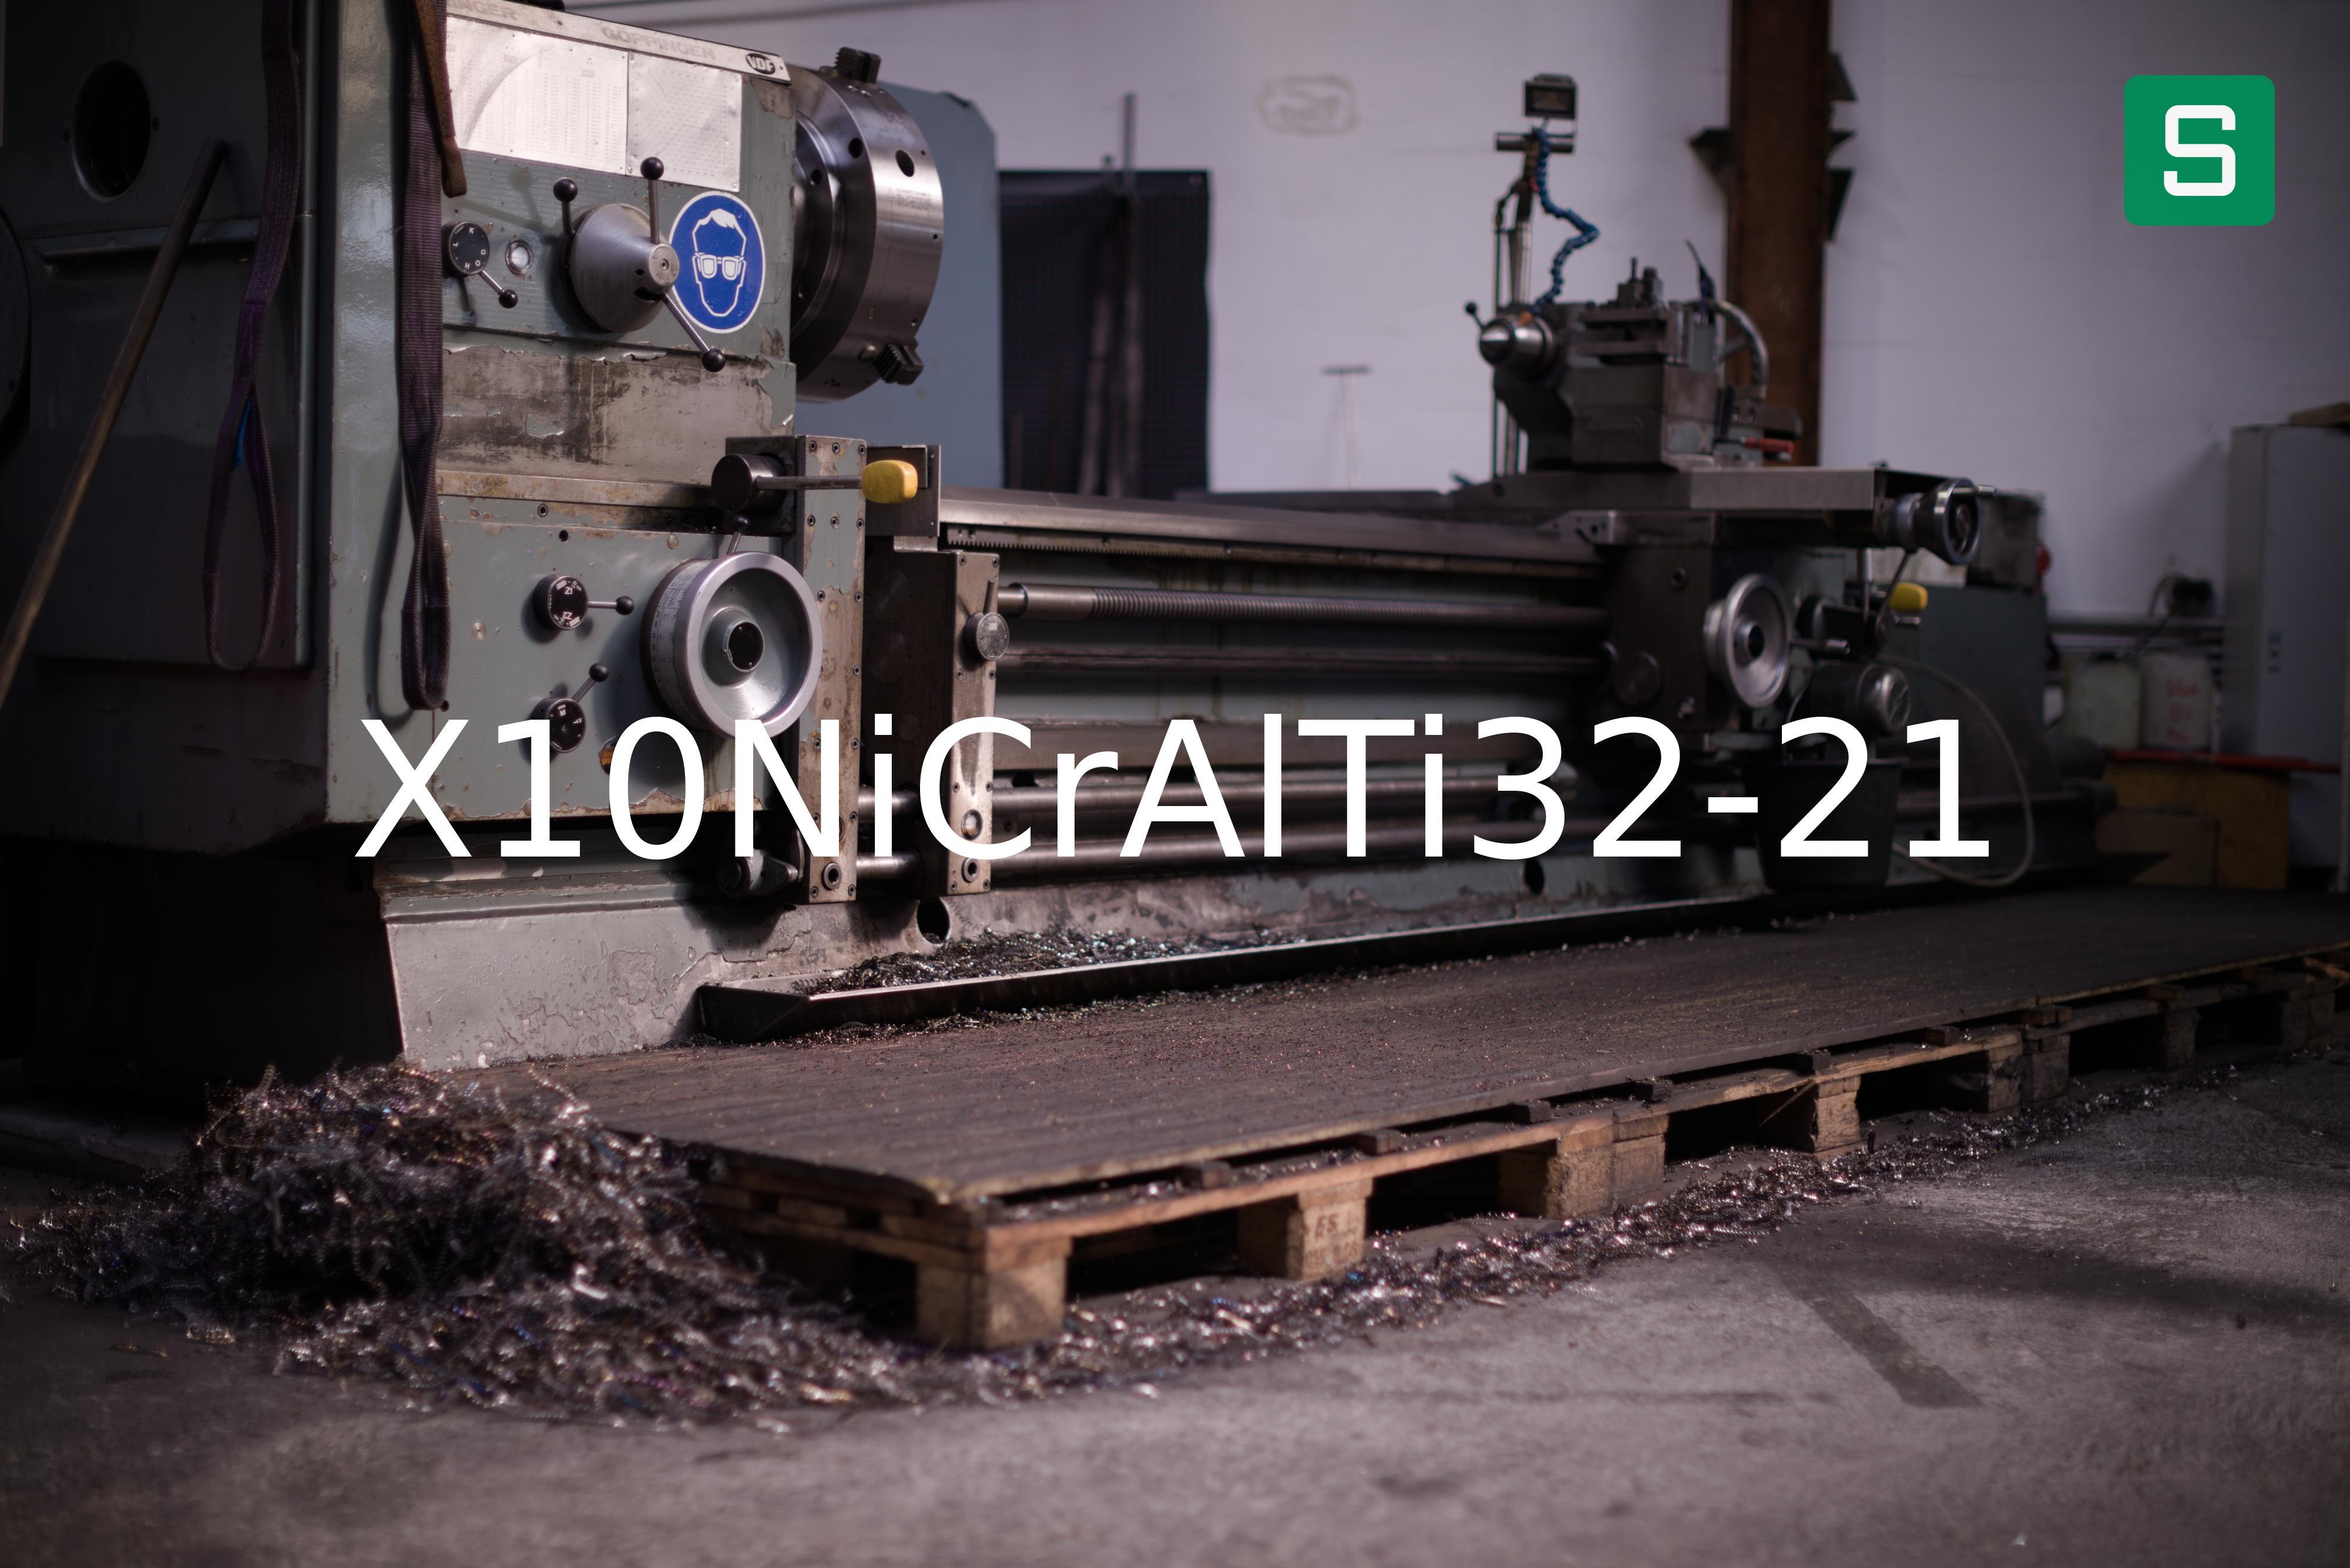 Steel Material: X10NiCrAlTi32-21